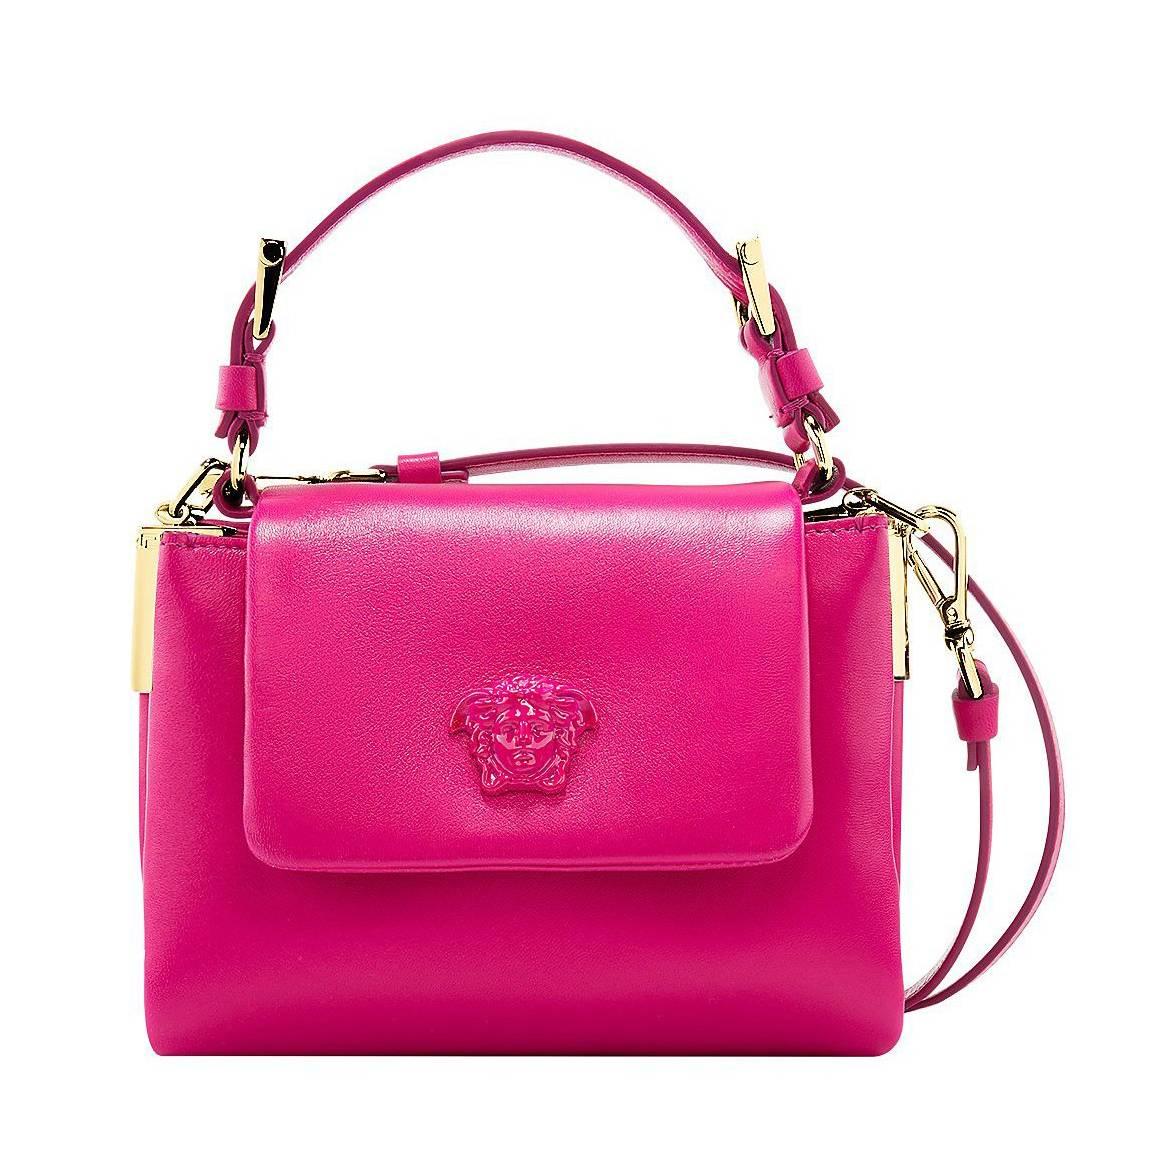 Versace Palazzo Small Pink Leather Top Handle Shoulder Bag